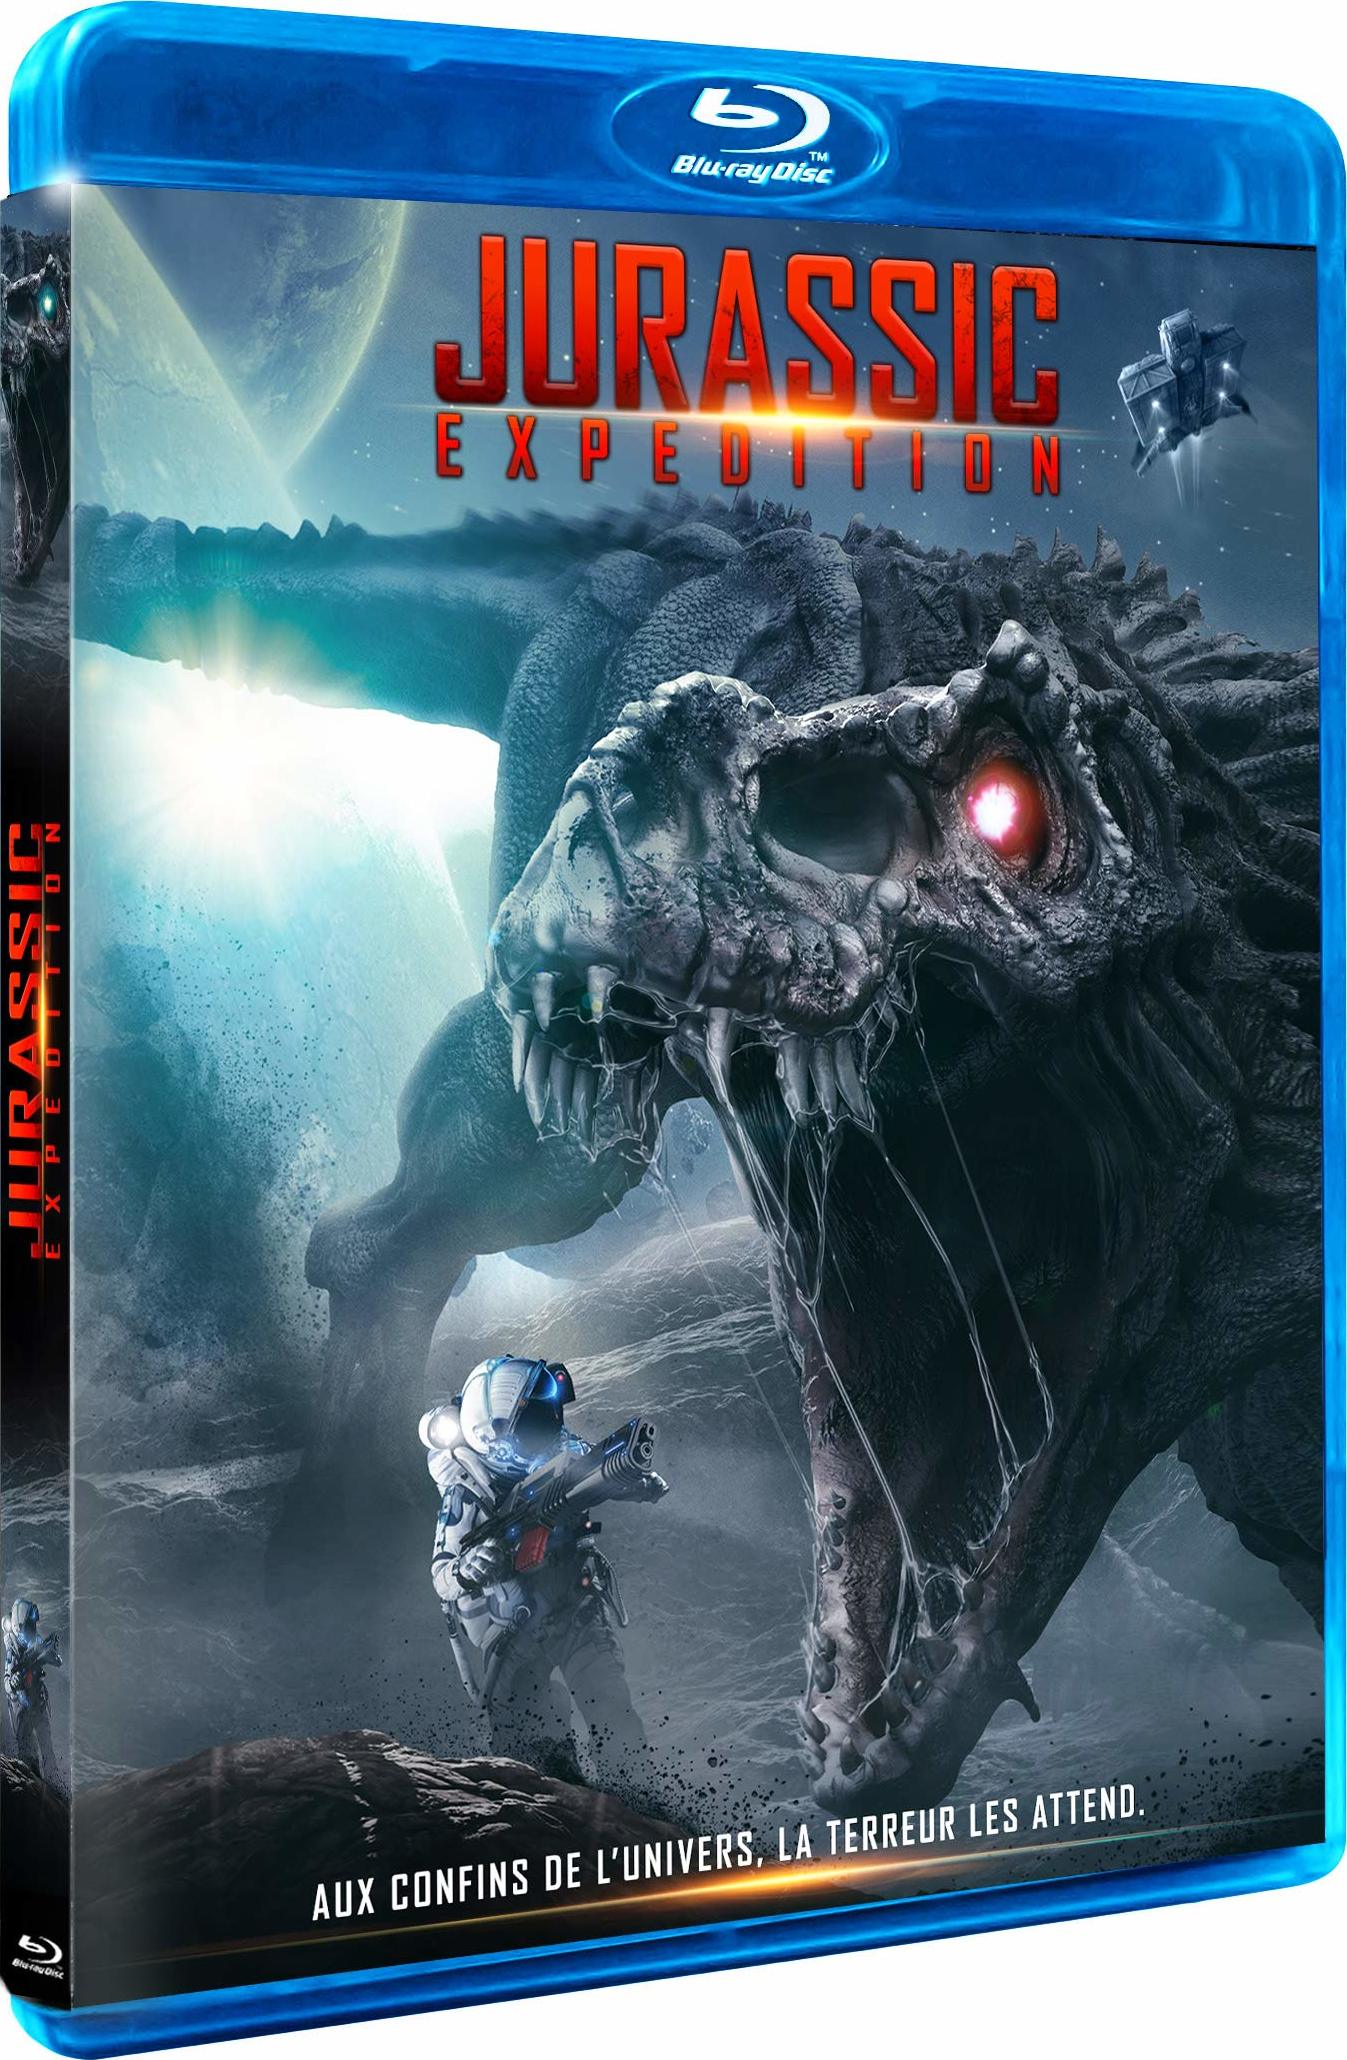 Alien Expedition Blu-ray (Jurassic Expedition) (France)